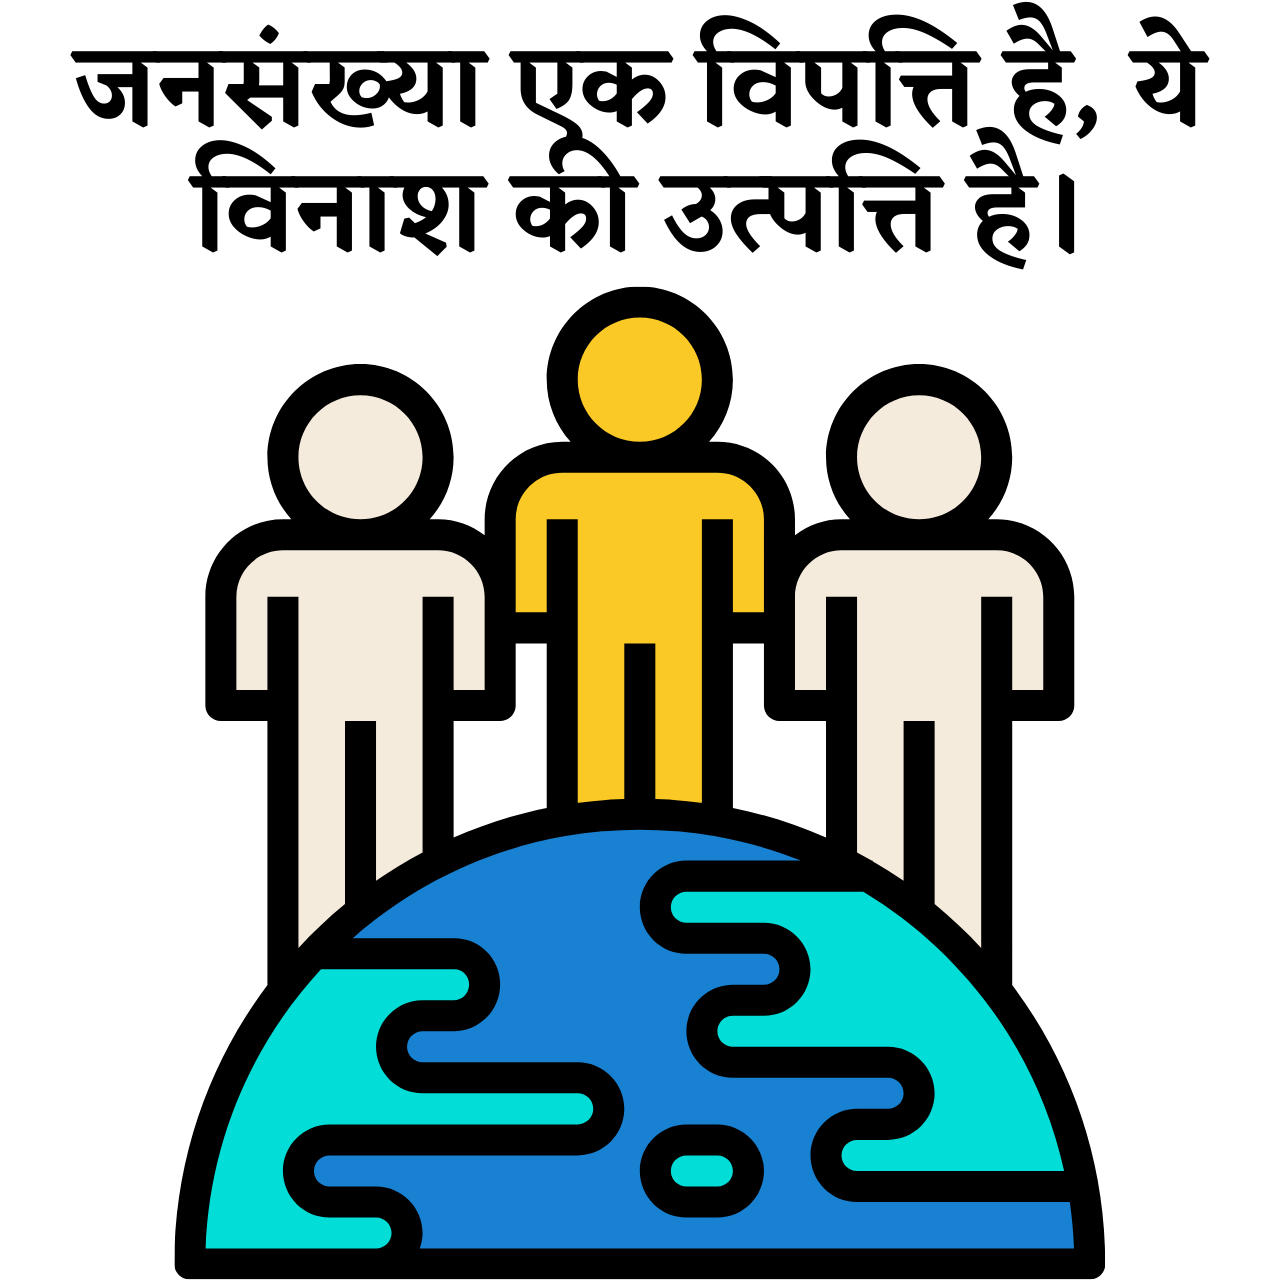 World Population Day 2021: Hindi Quotes, Slogans, Messages, and Status to spread awareness about Overpopulation issues